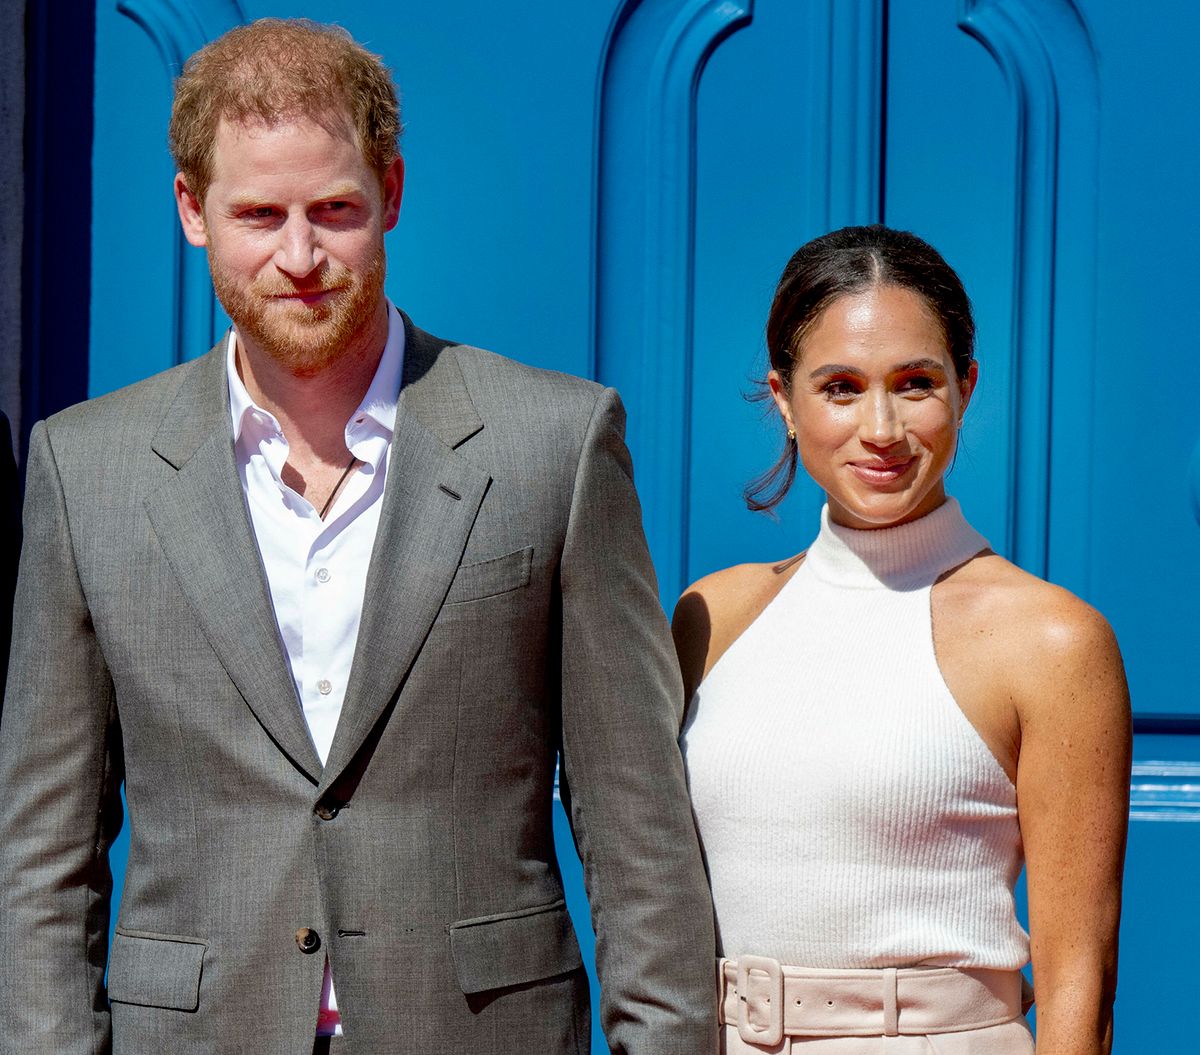 Prince Harry and Meghan, Duke and Duchess of Sussex in Dusseldorf Photo: Albert Nieboer / Netherlands OUT / Point de Vue OUT Prince Harry, Duke of Sussex and Meghan, Duchess of Sussex arrive at the townhall in Dusseldorf, on September 06, 2022, to give the kick-off of the One Year to Go event of the Invictus Games DUSSELDORF 2023 Photo: Albert Nieboer / Netherlands OUT / Point de Vue OUT (Photo by Albert Nieboer / Royal Press Europe / dpa Picture-Alliance via AFP)